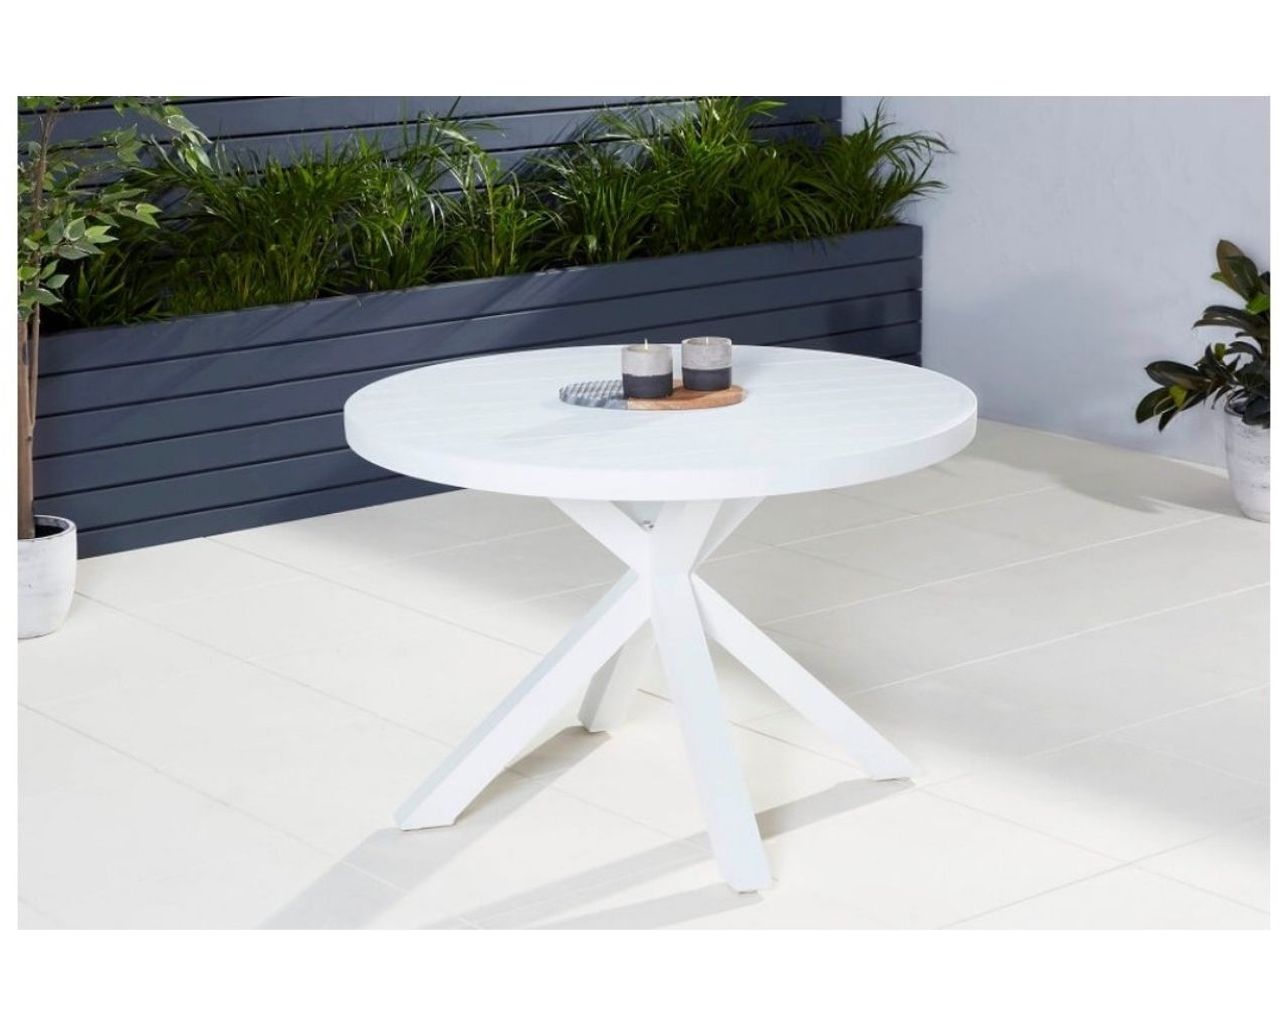 Jette Round Dining Table 107.5cm (white), , hi-res image number null